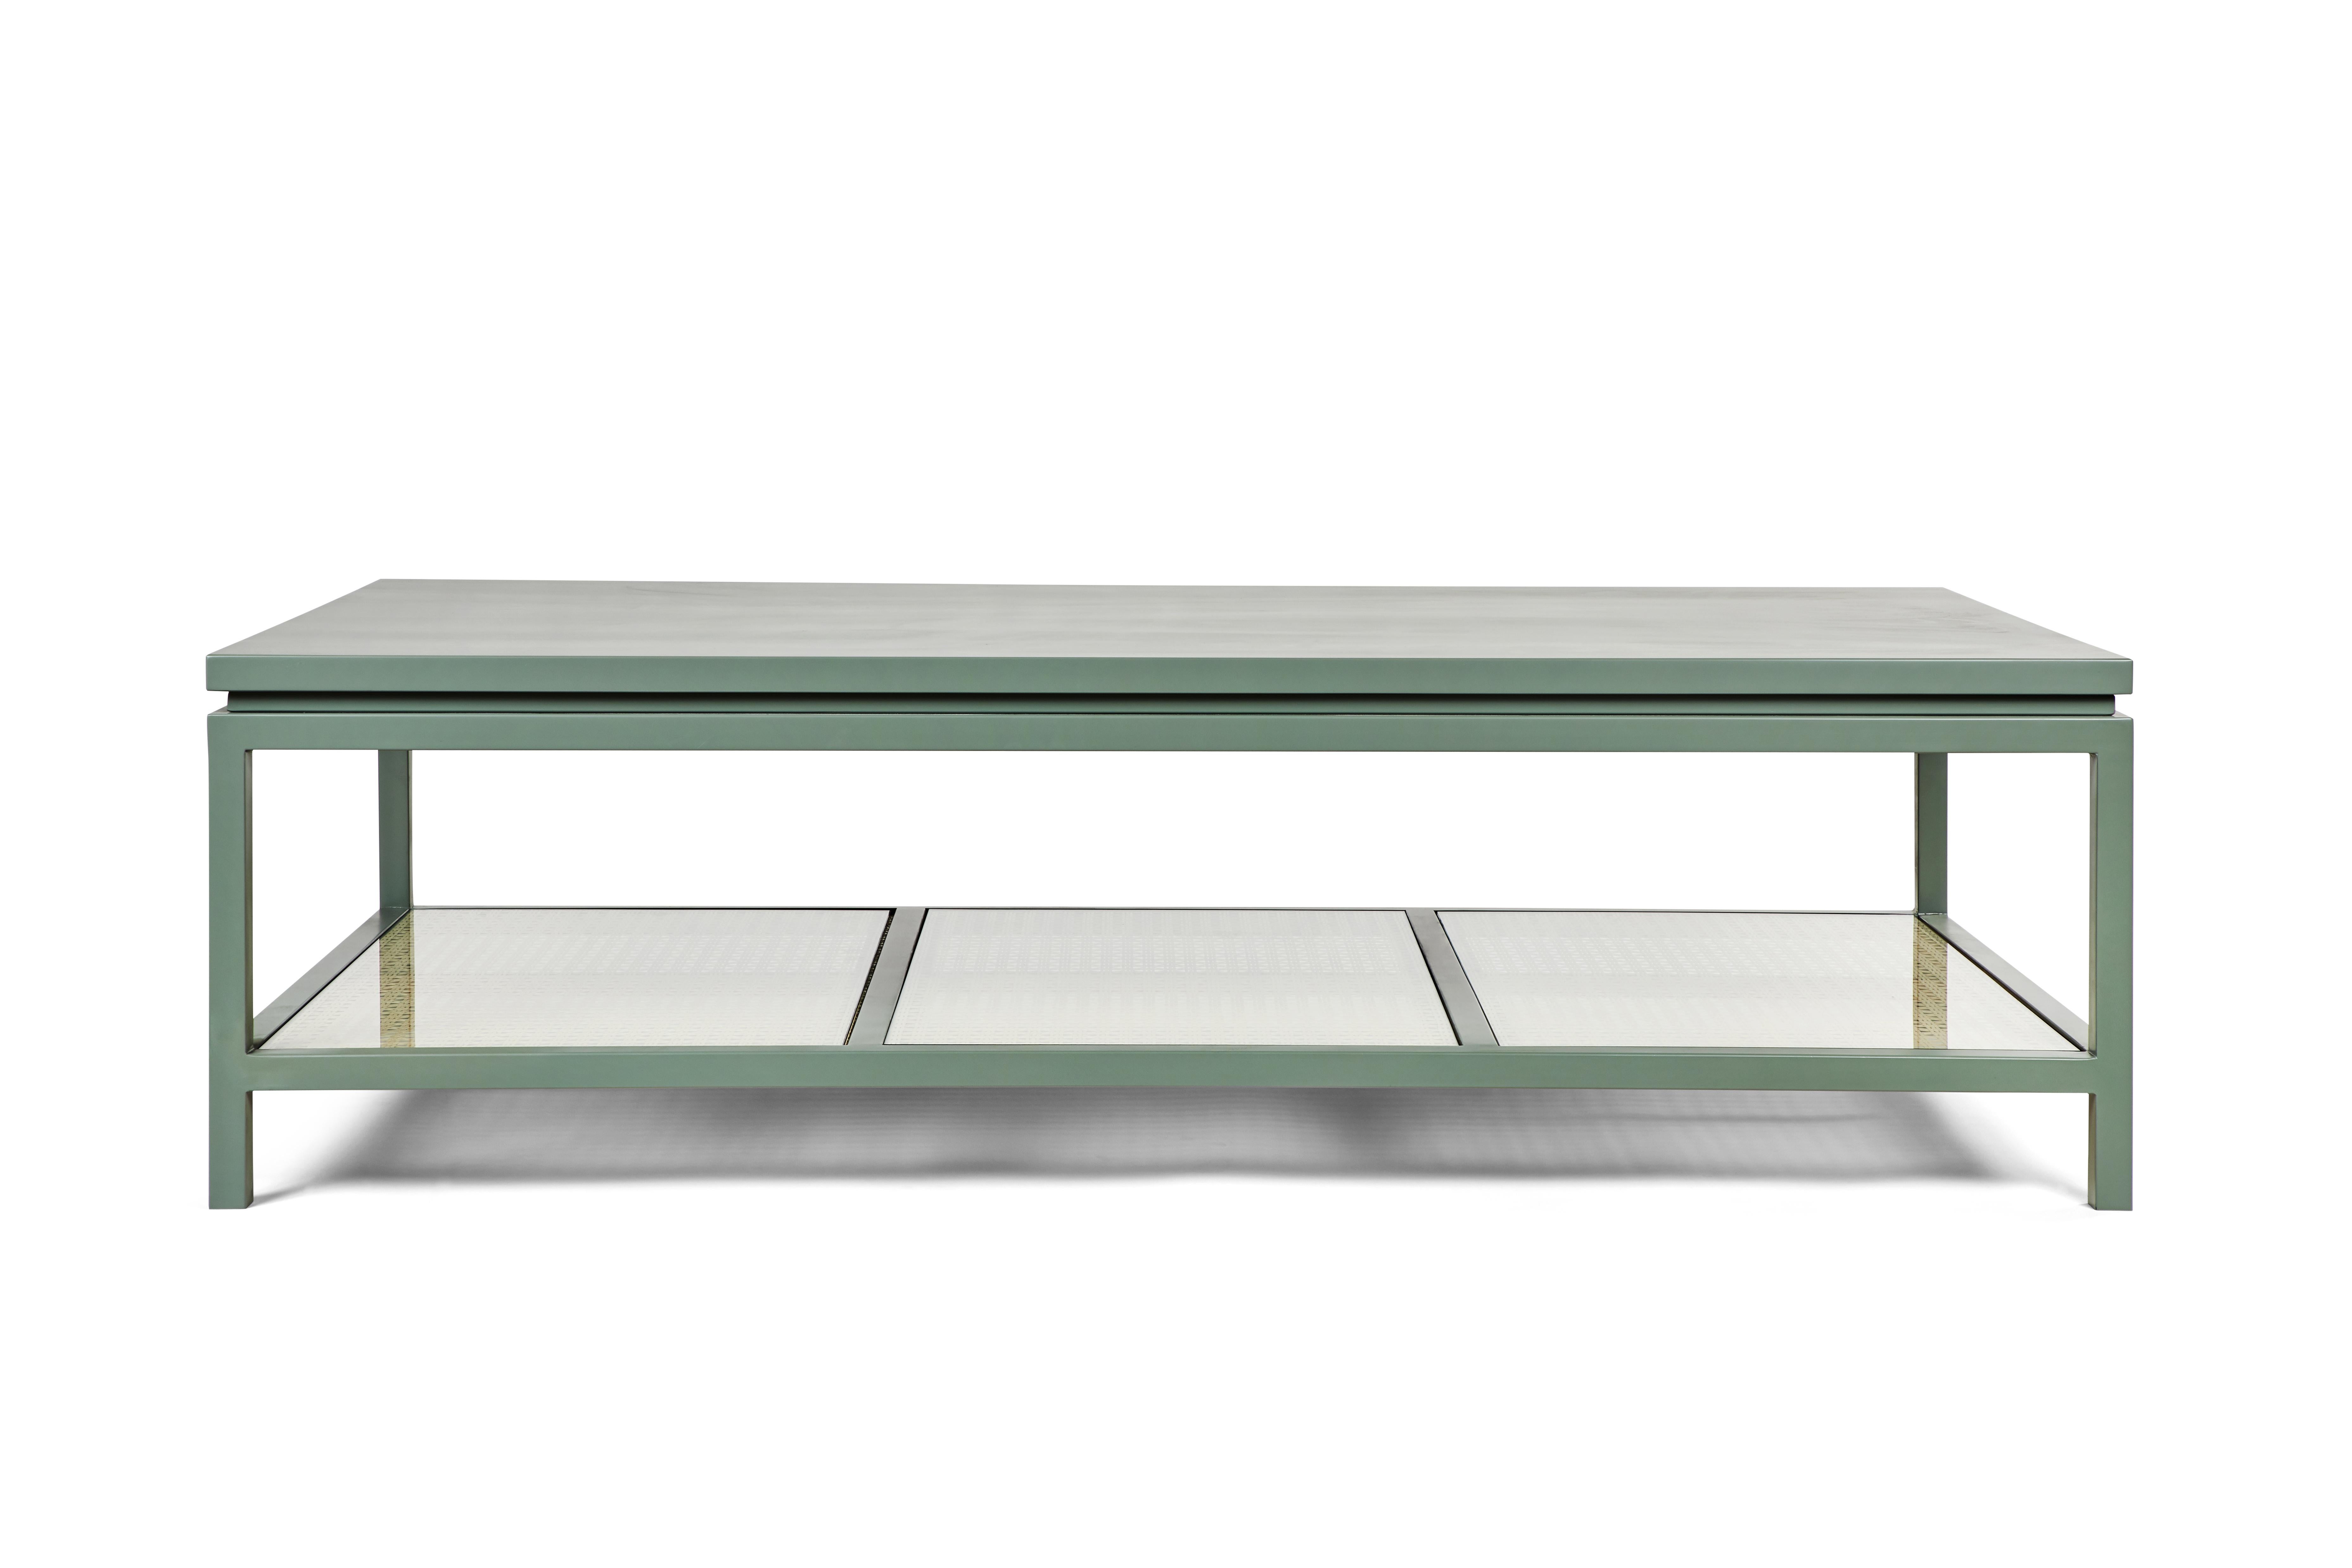 Our oversized Ellwood Coffee Table celebrates the colors of the California landscape. Shown here in our Eucalyptus finish, the hand-made table pairs a matte-satin lacquer with cane and clear starphire glass. Perfect for displaying a coffee table